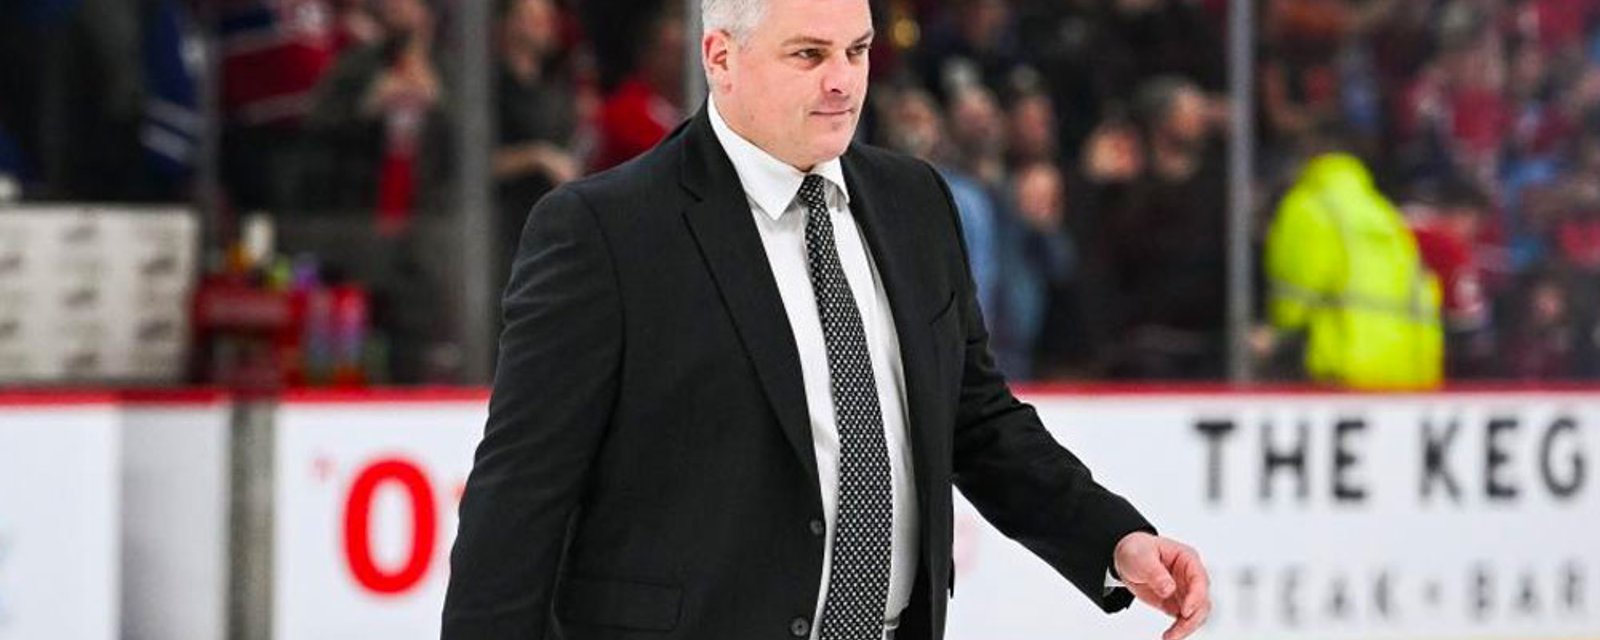 GM Treliving confirms that Sheldon Keefe will be back next season